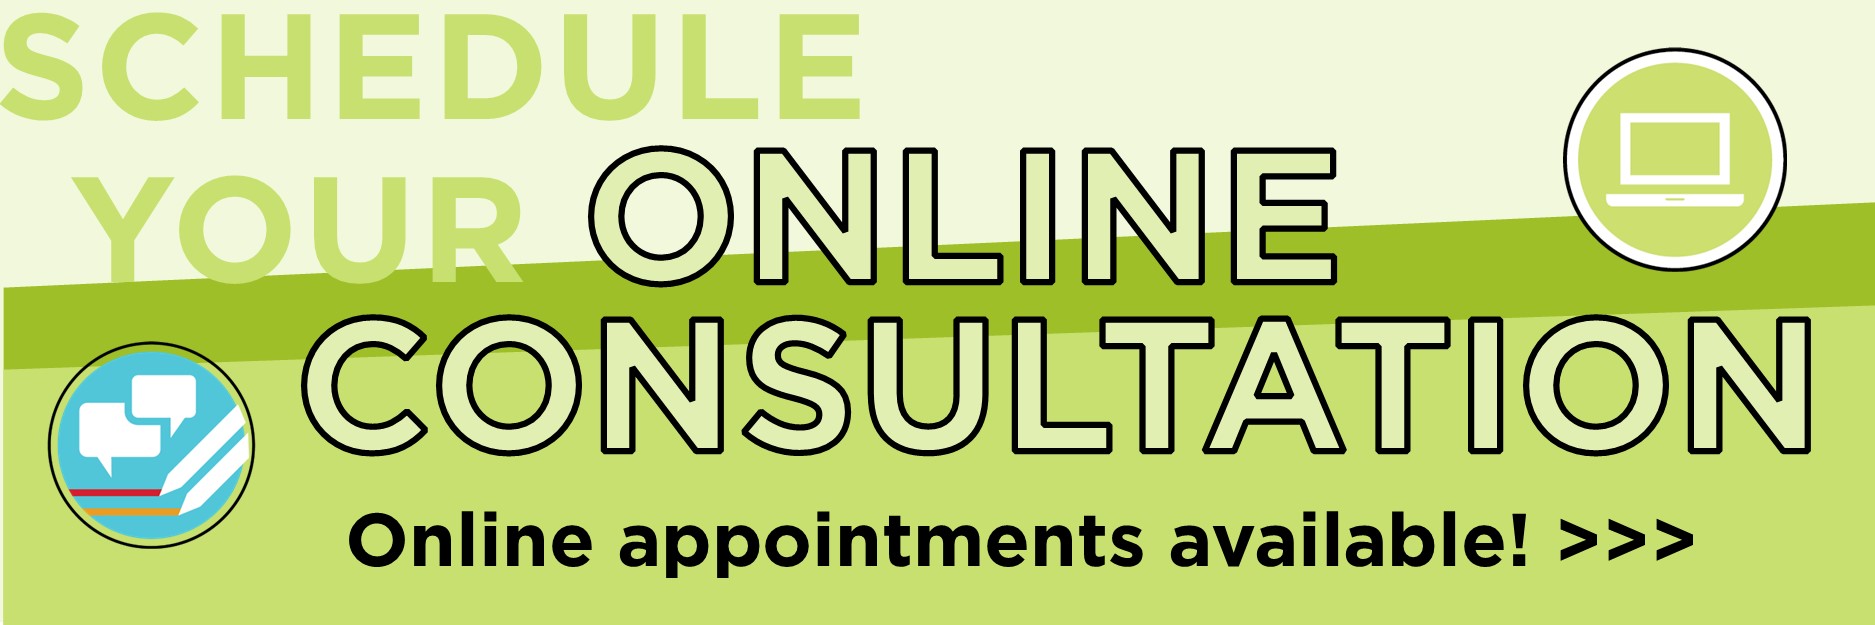  The Howe Writing Center offers online writing consulting appointments in addition to in-person support.